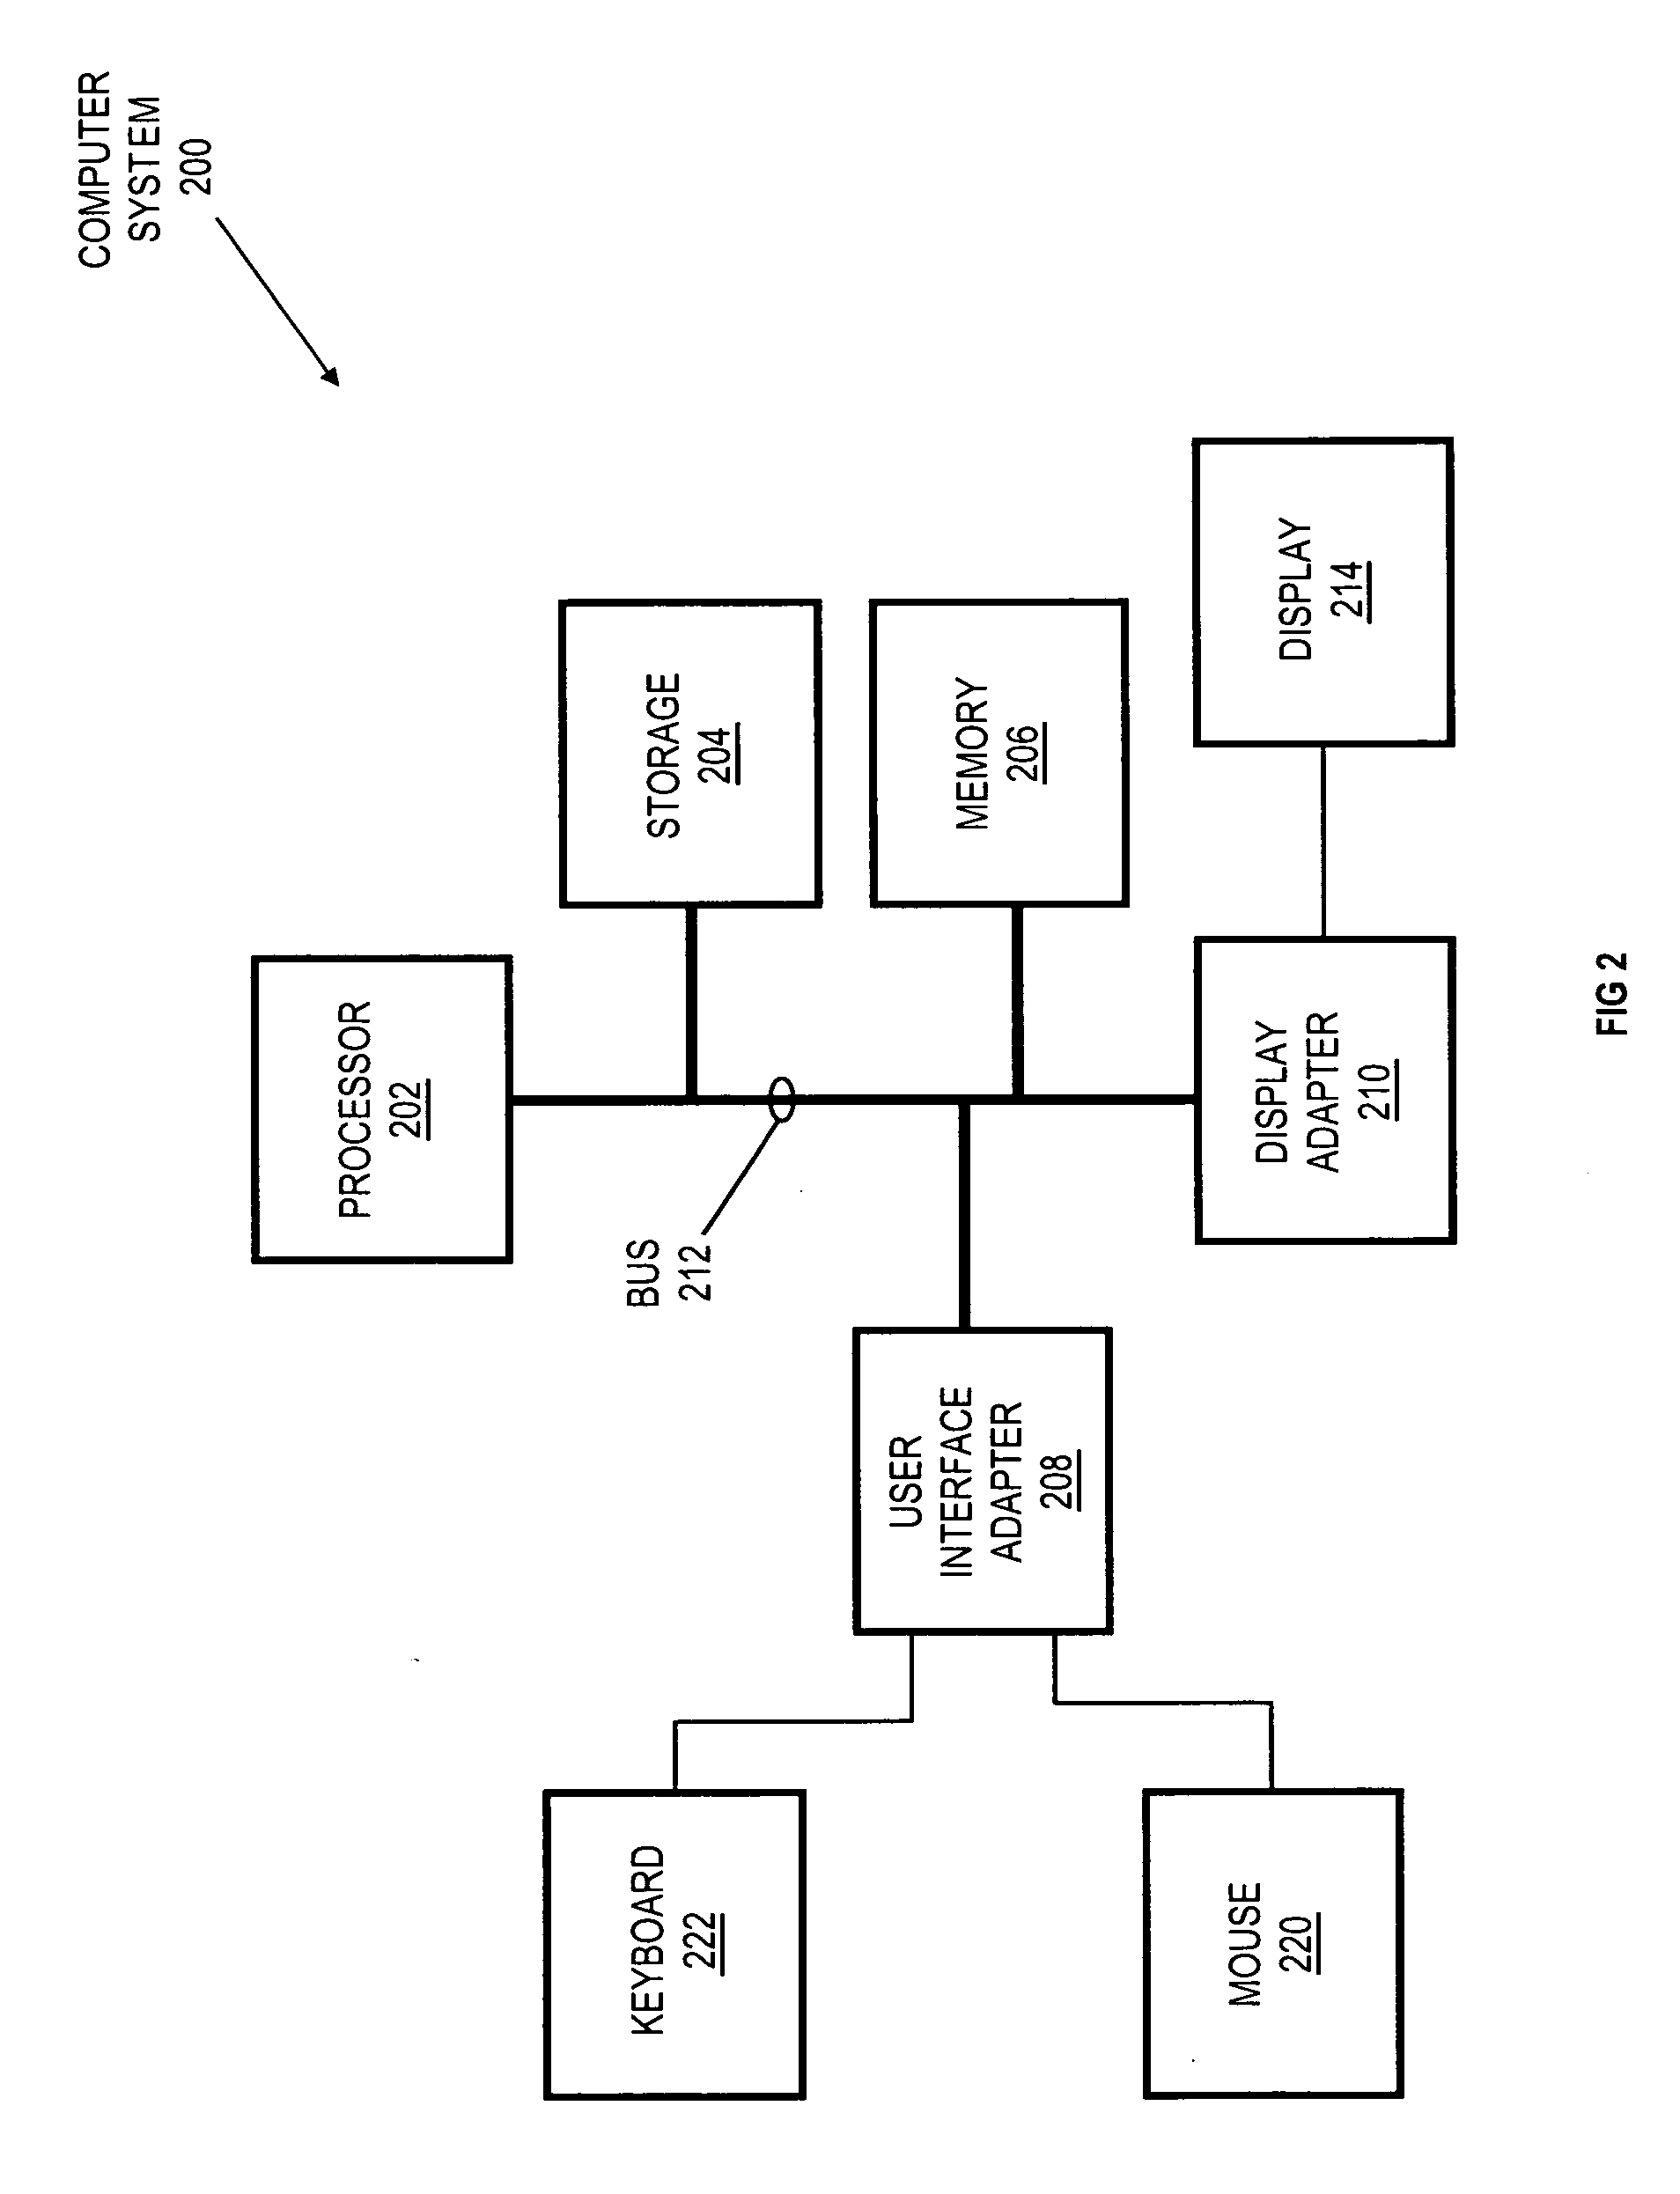 Systems, methods, and media for dynamically generating a portal site map